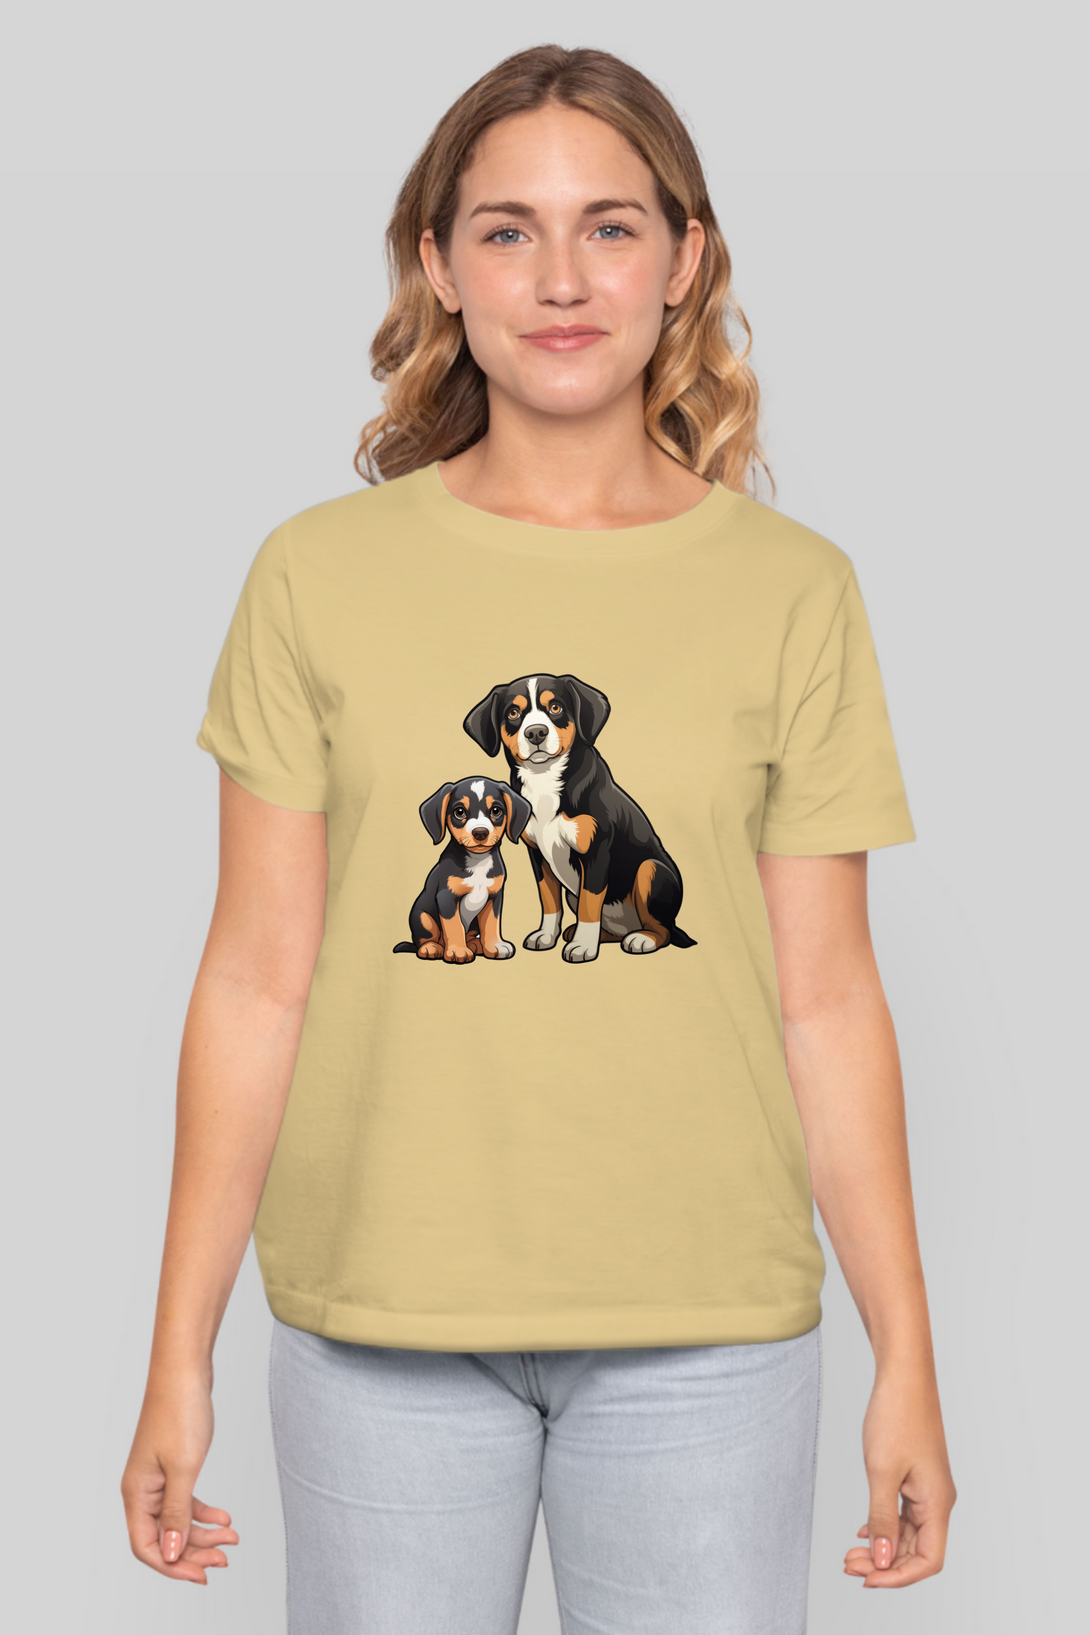 Puppy And Dog Printed T-Shirt For Women - WowWaves - 7